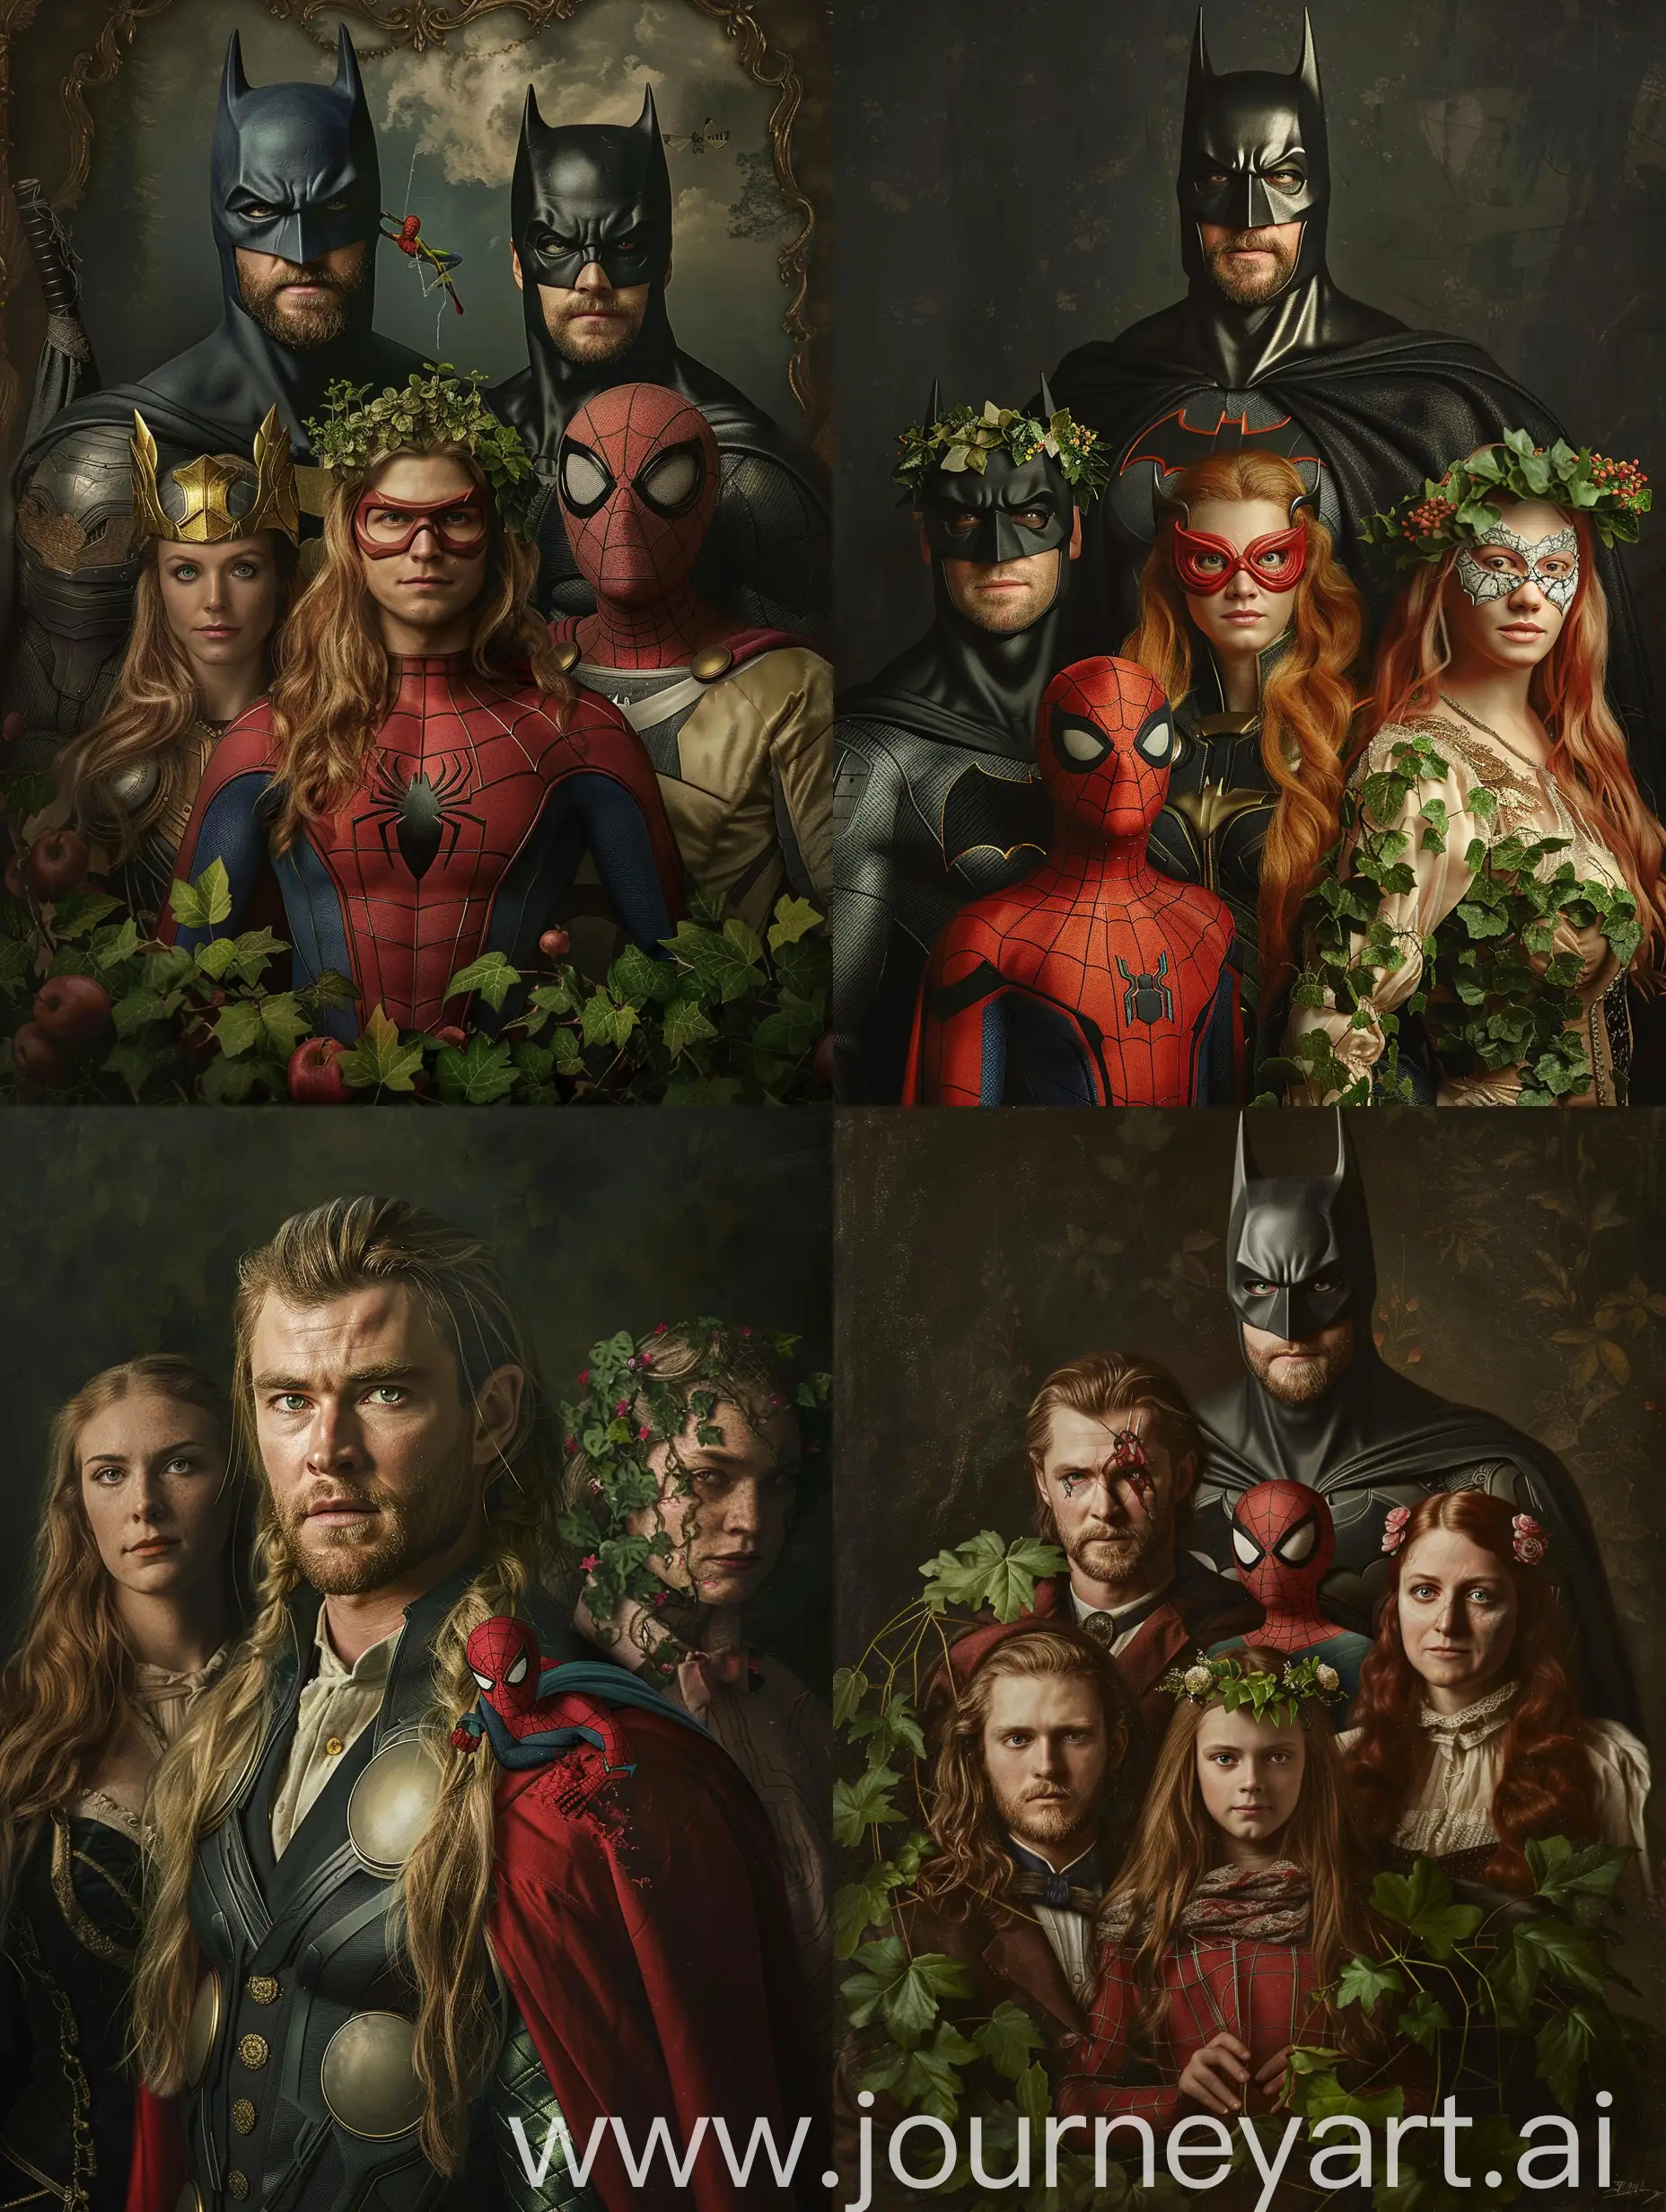 Hyper realistic portrait of Superheroes in the 19th century, Thor, Batman, Spider-Man, Poison Ivy